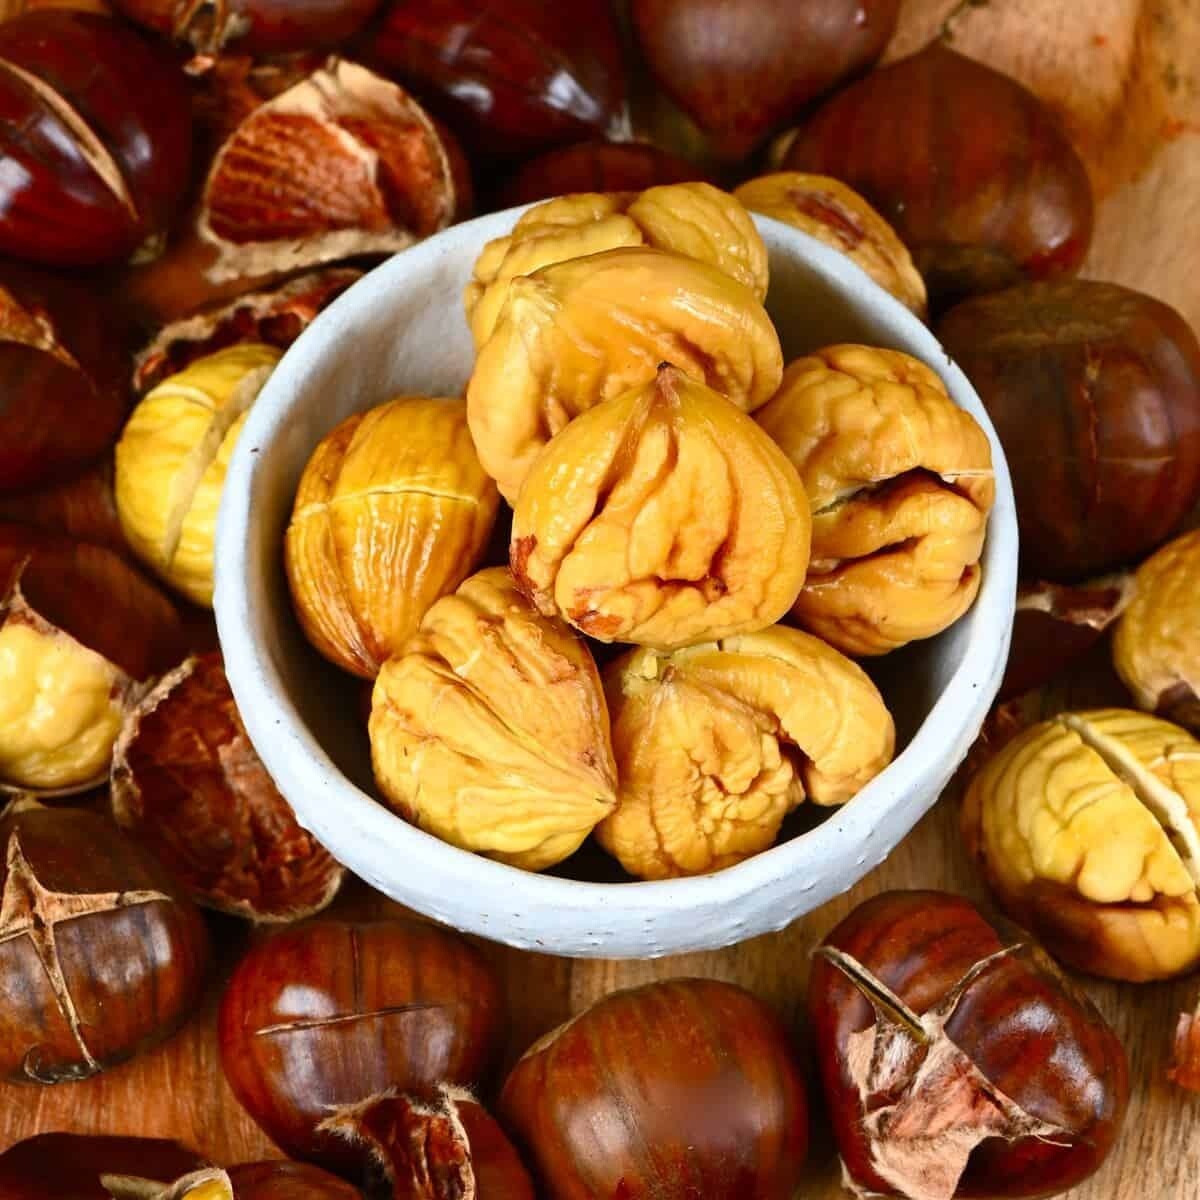 Peeled roasted chestnuts (300g) ابوفروه محمص مقشر